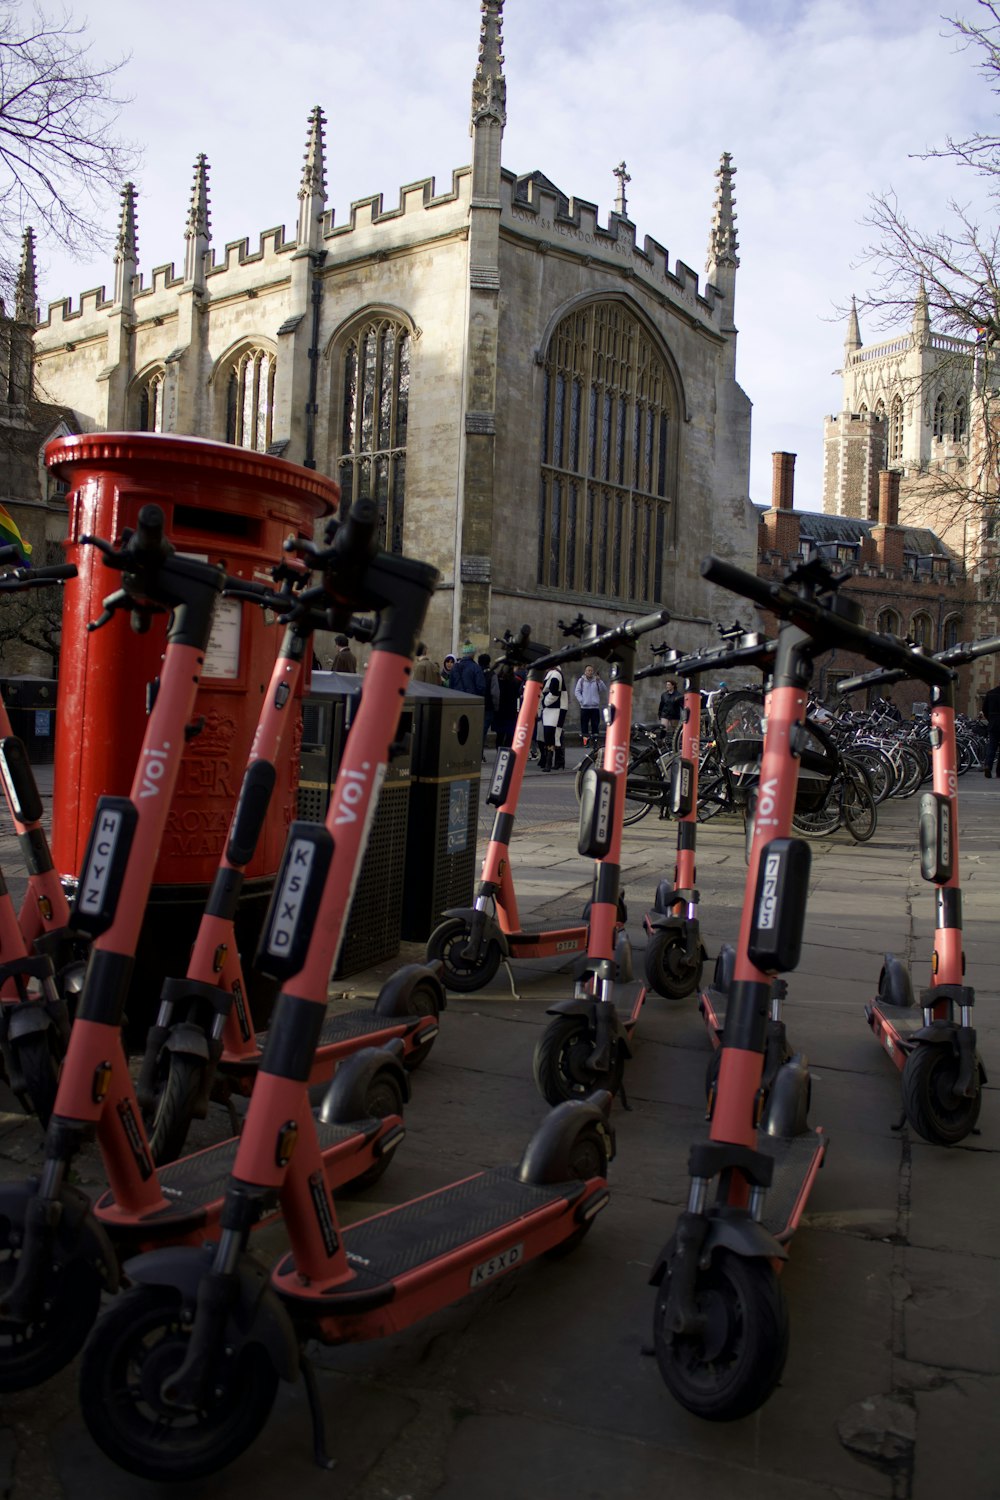 a group of red scooters parked in front of a building